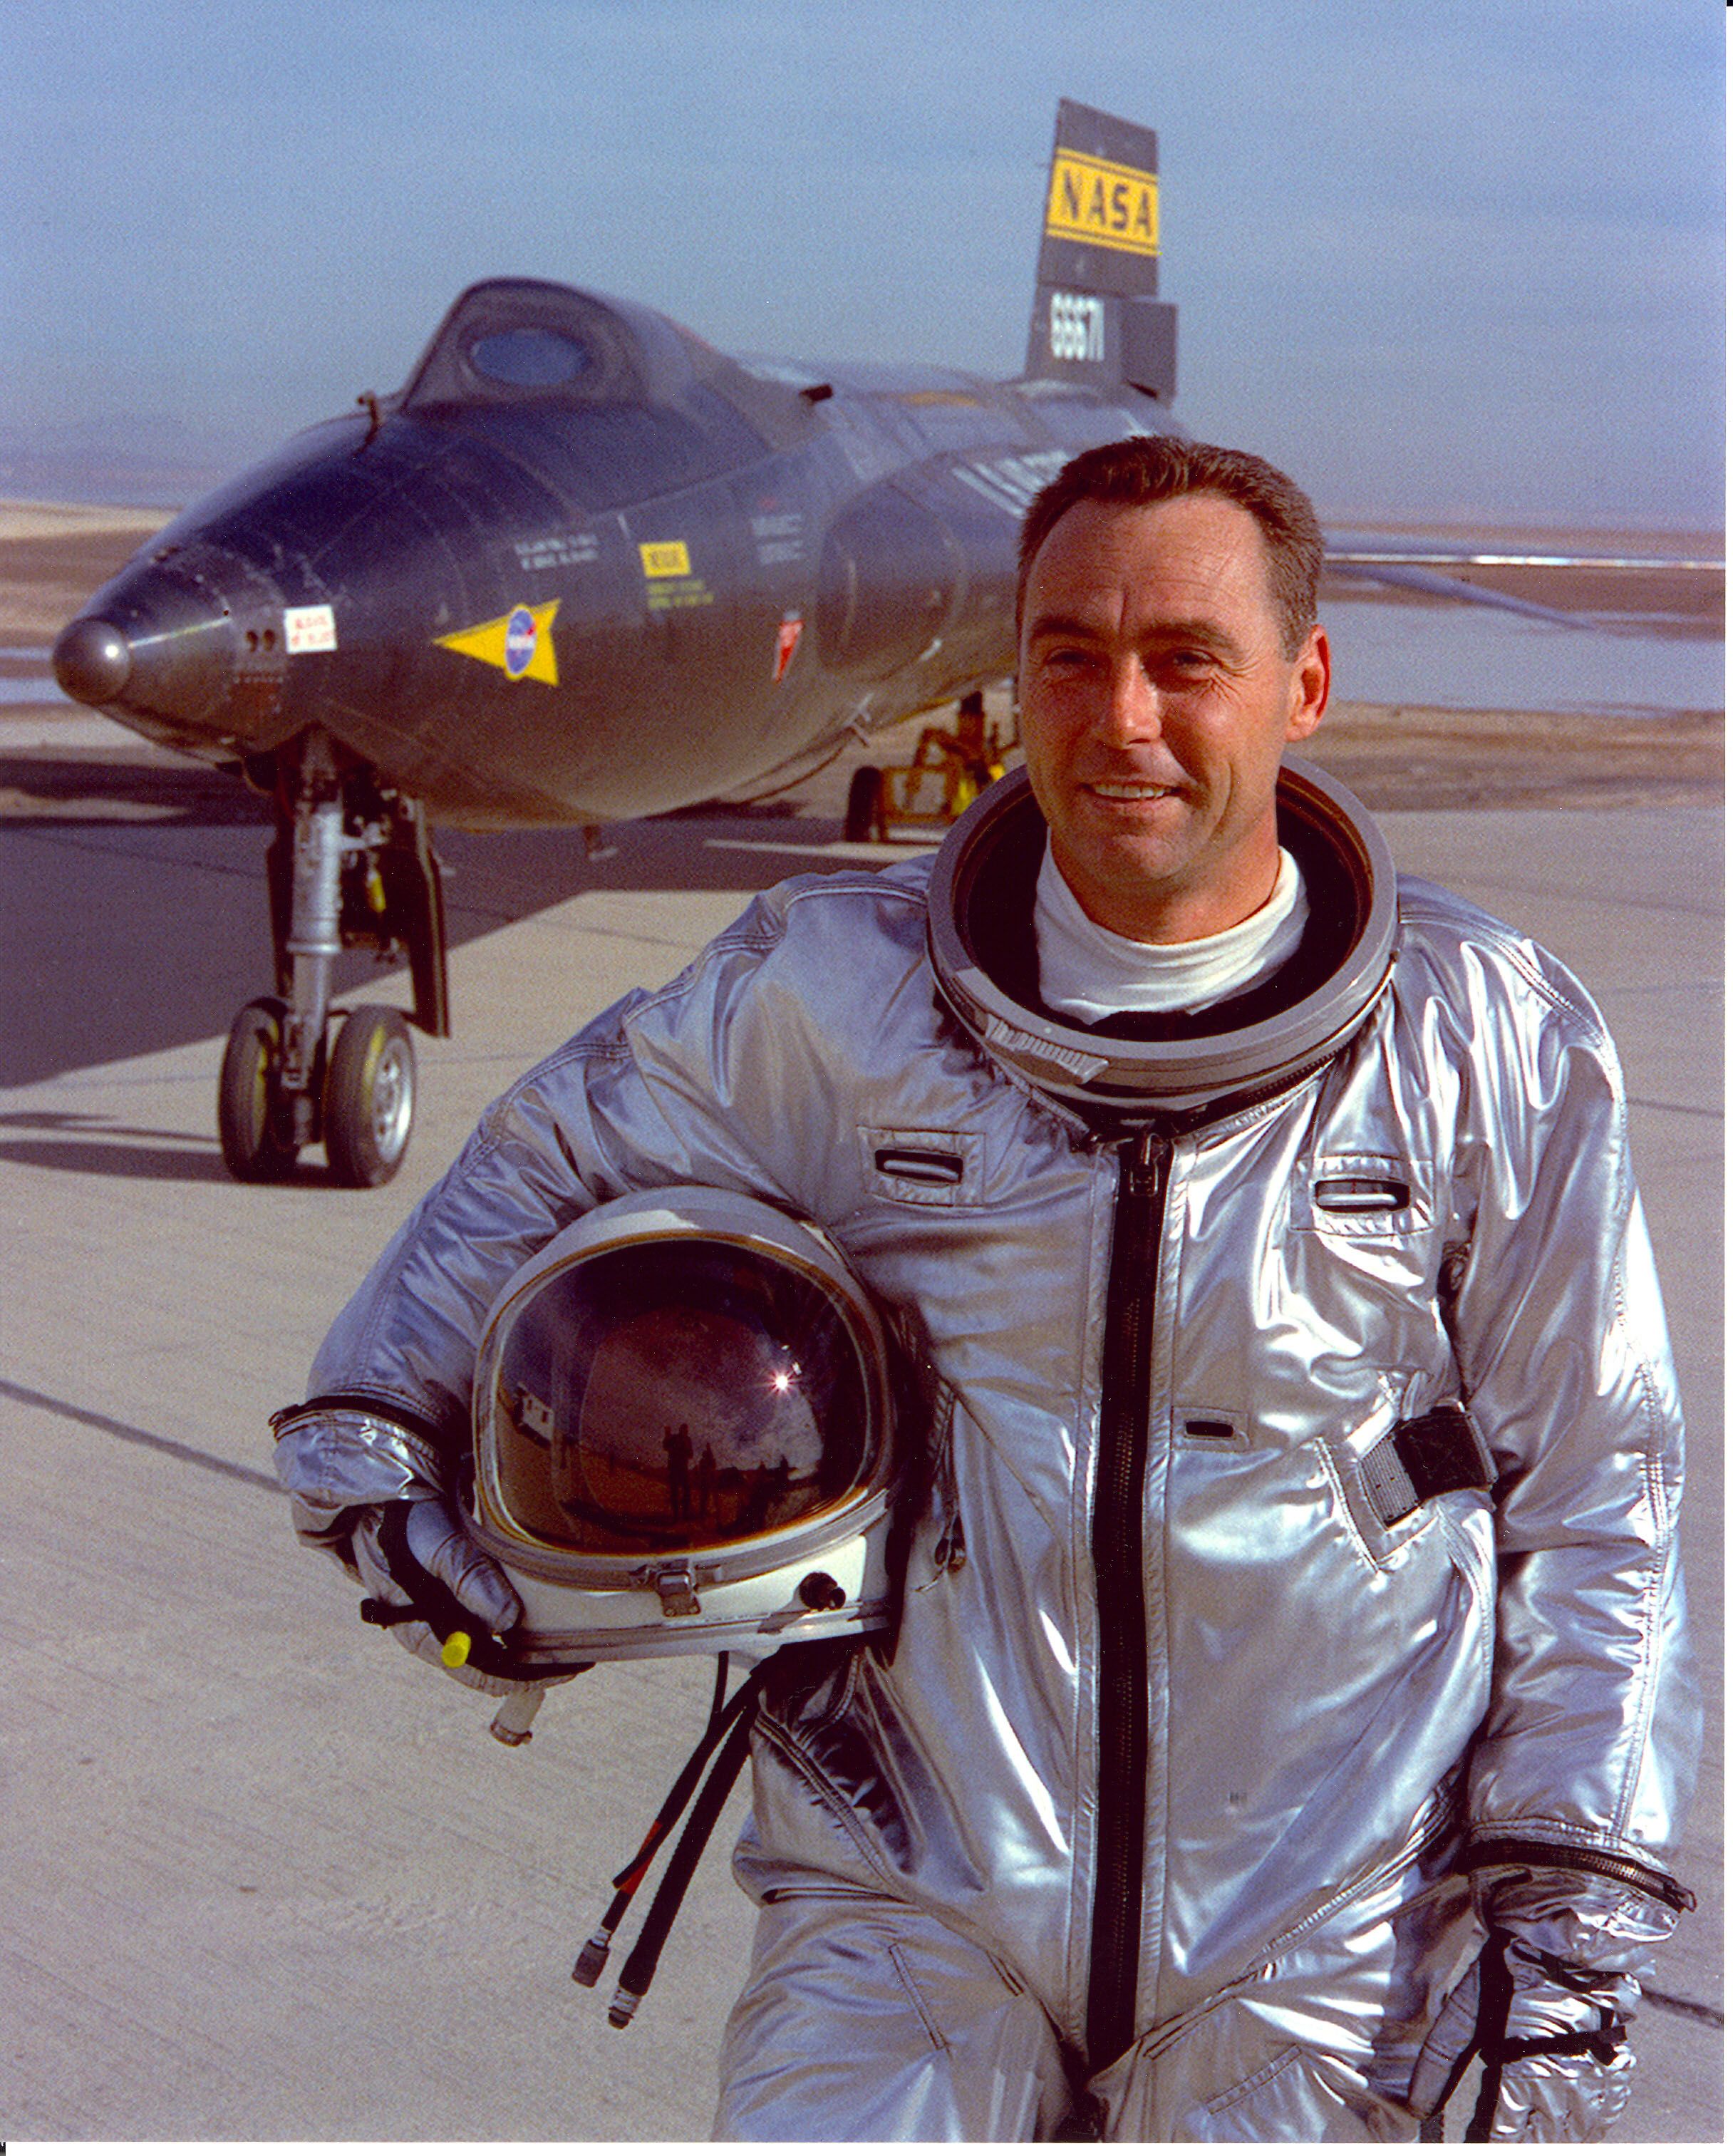 Pete Knight in front of aircraft